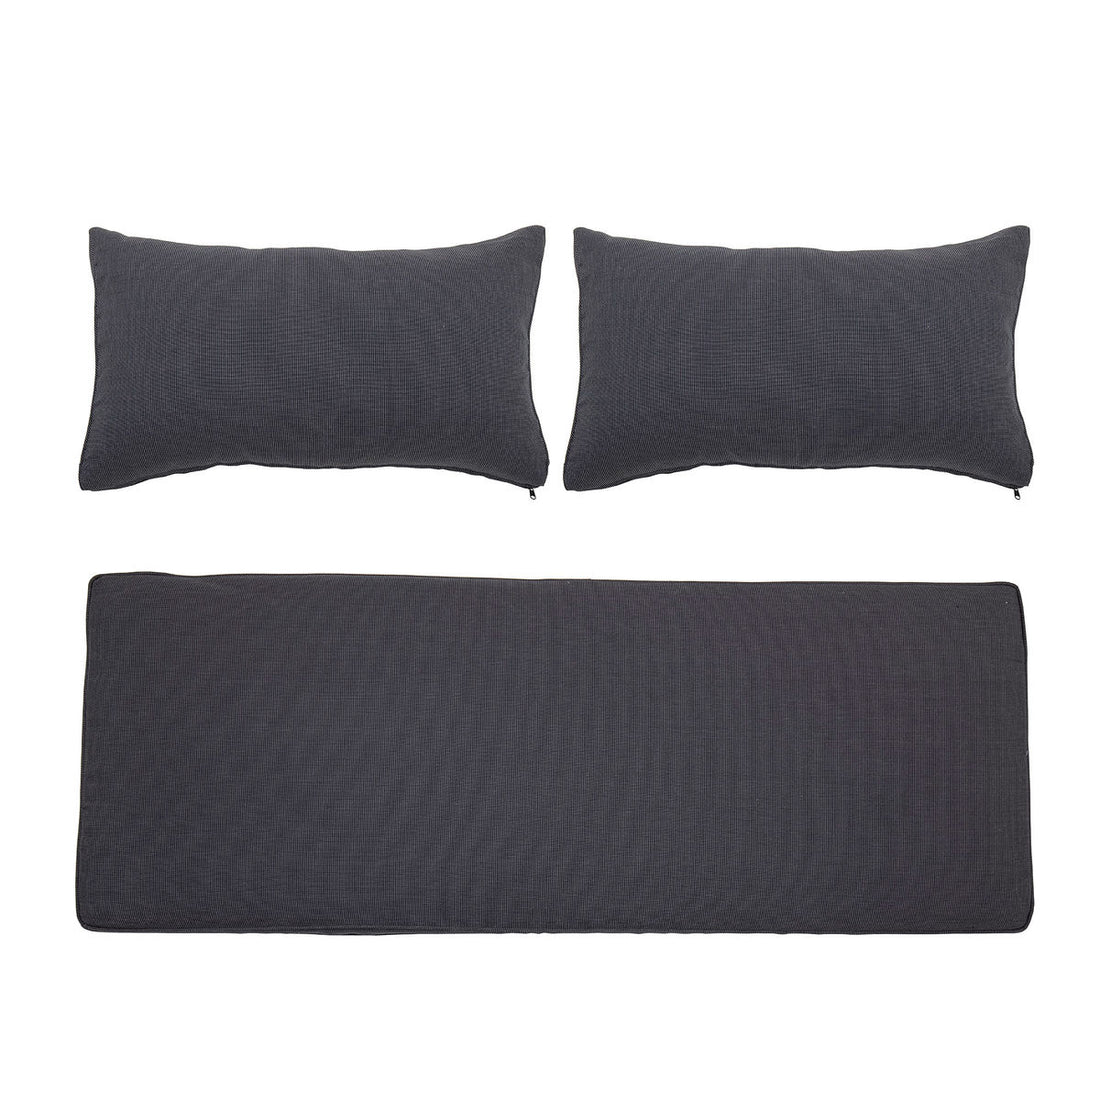 Bloomingville Mundo pillowcases (without filling), gray, polyester